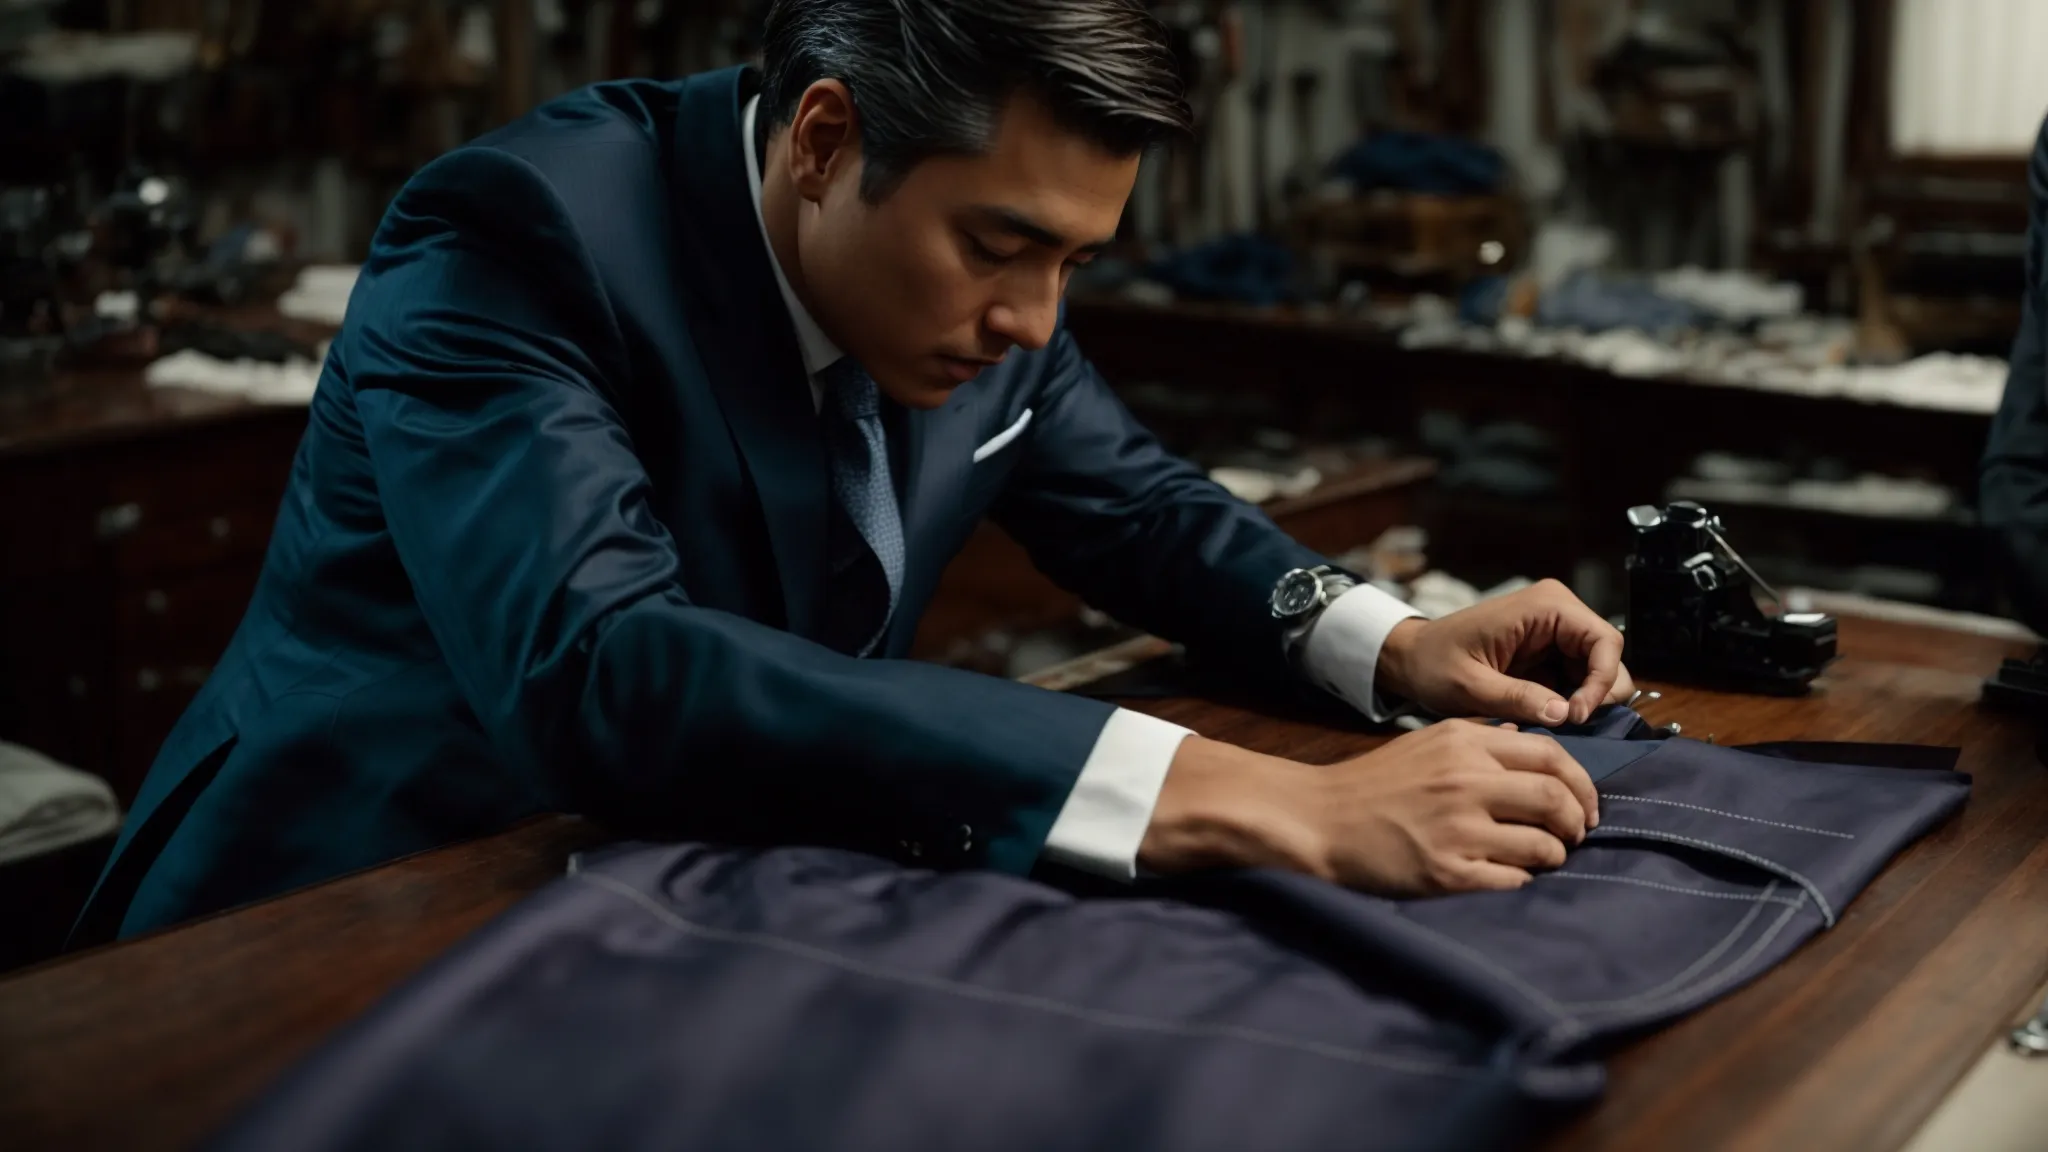 a tailor carefully measuring a suit laying on a worktable, surrounded by various tailoring tools.